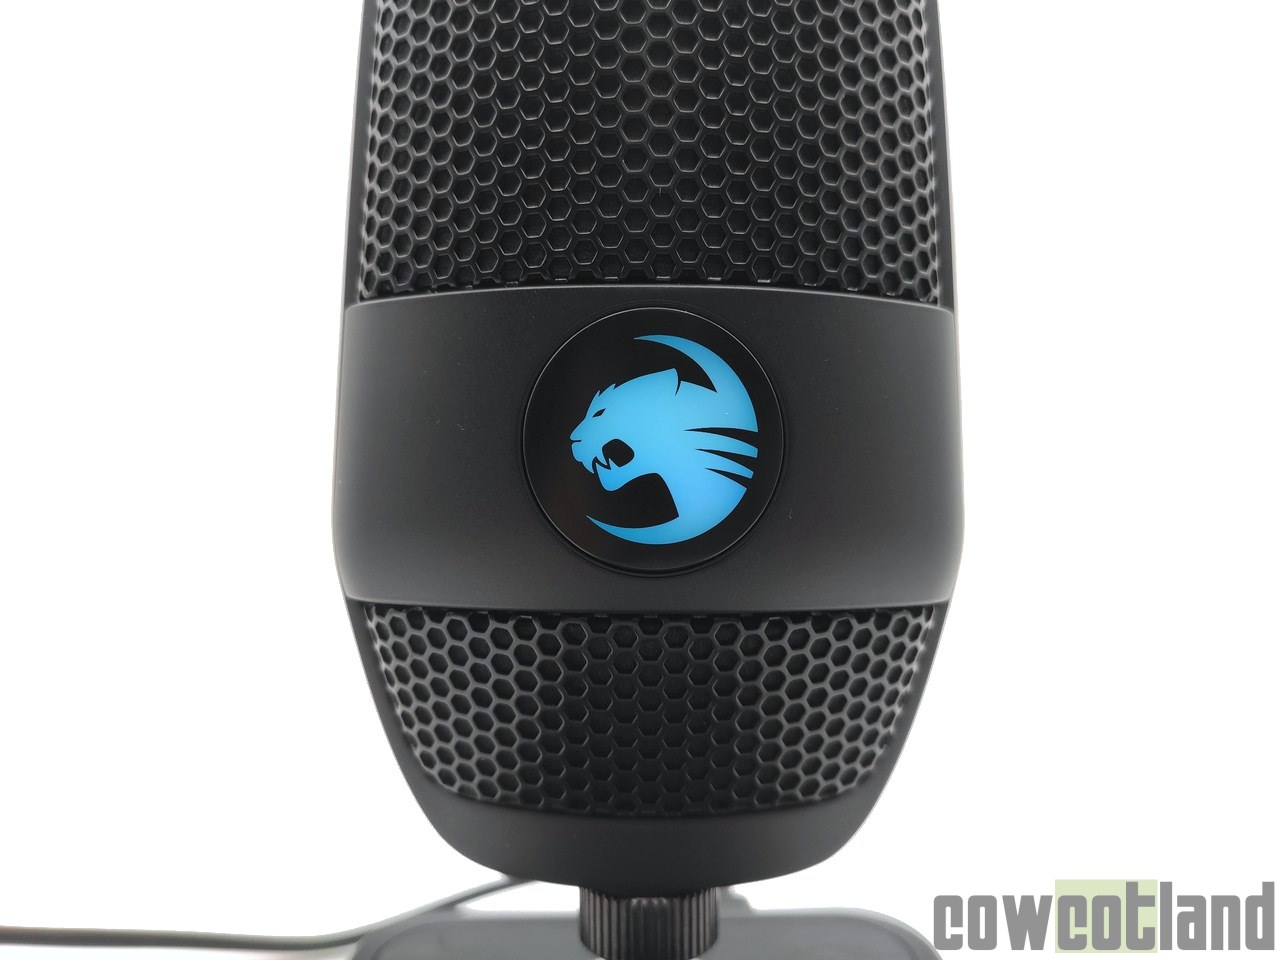 Image 45863, galerie Test micro ROCCAT Torch : ROCCAT se lance dans le micro gaming et streaming 